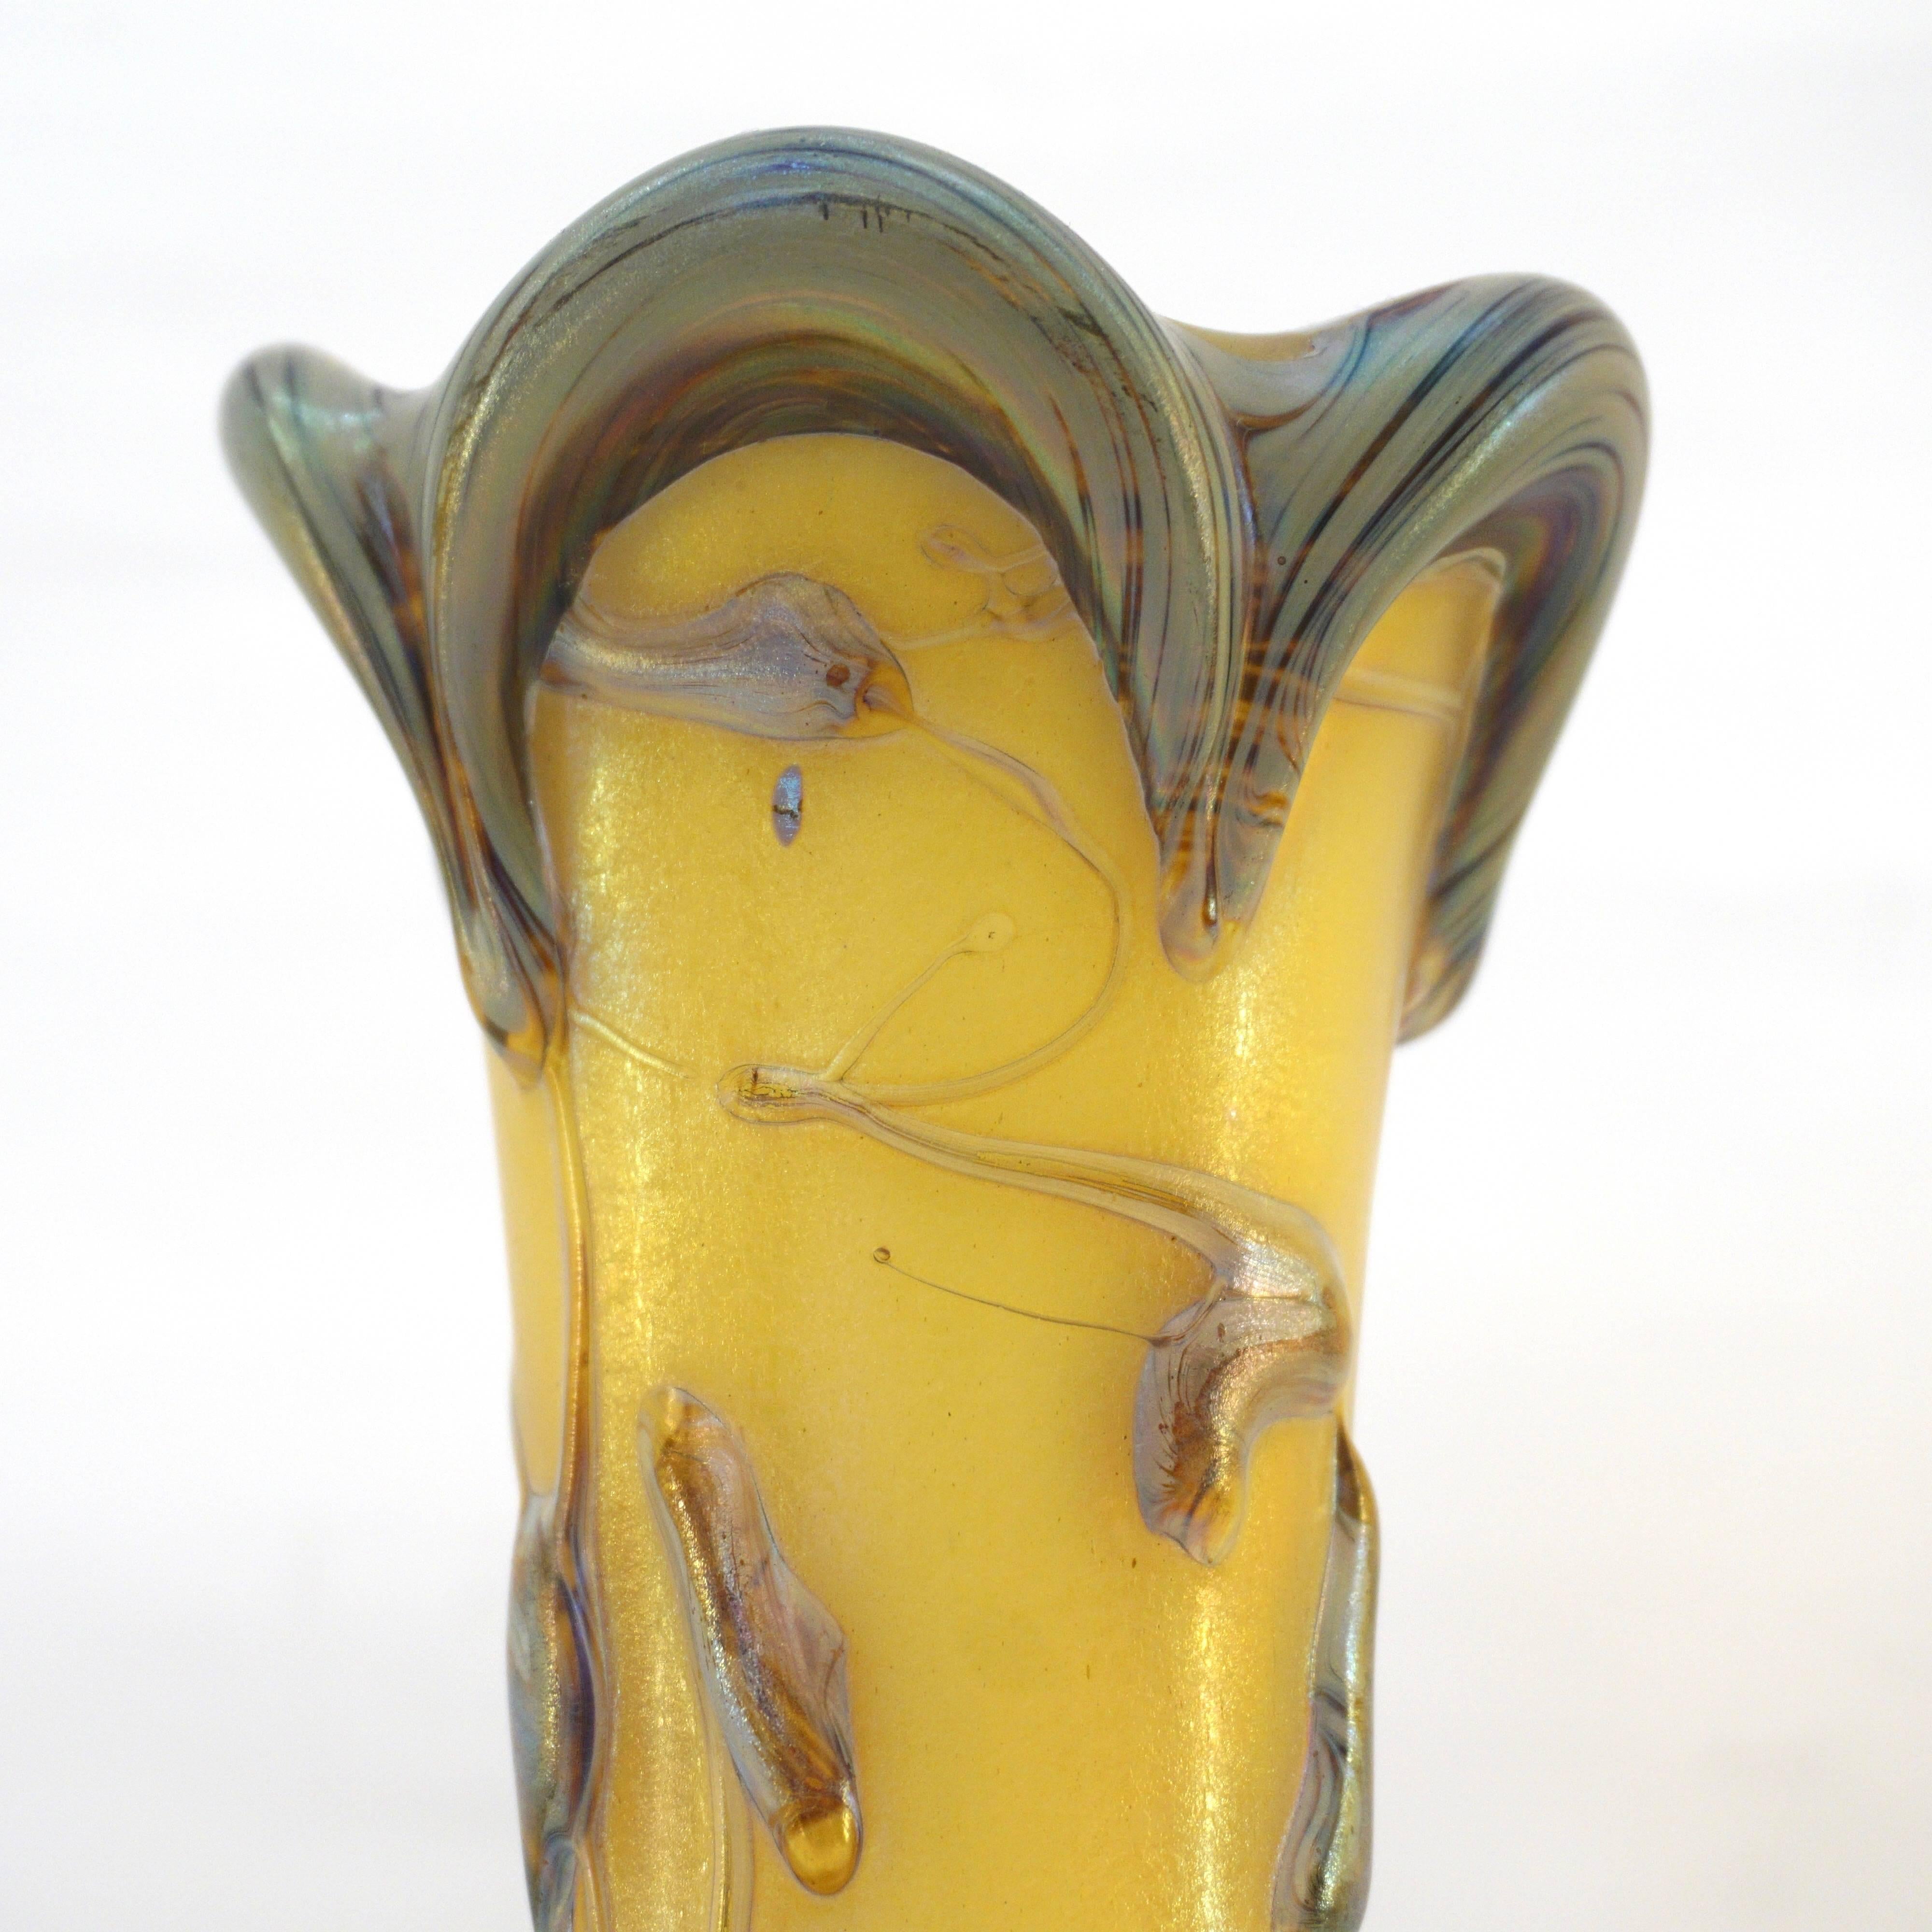 Hand-Crafted Art Nouveau French Antique Iridescent Yellow Azure Blue and Gray Art Glass Vase